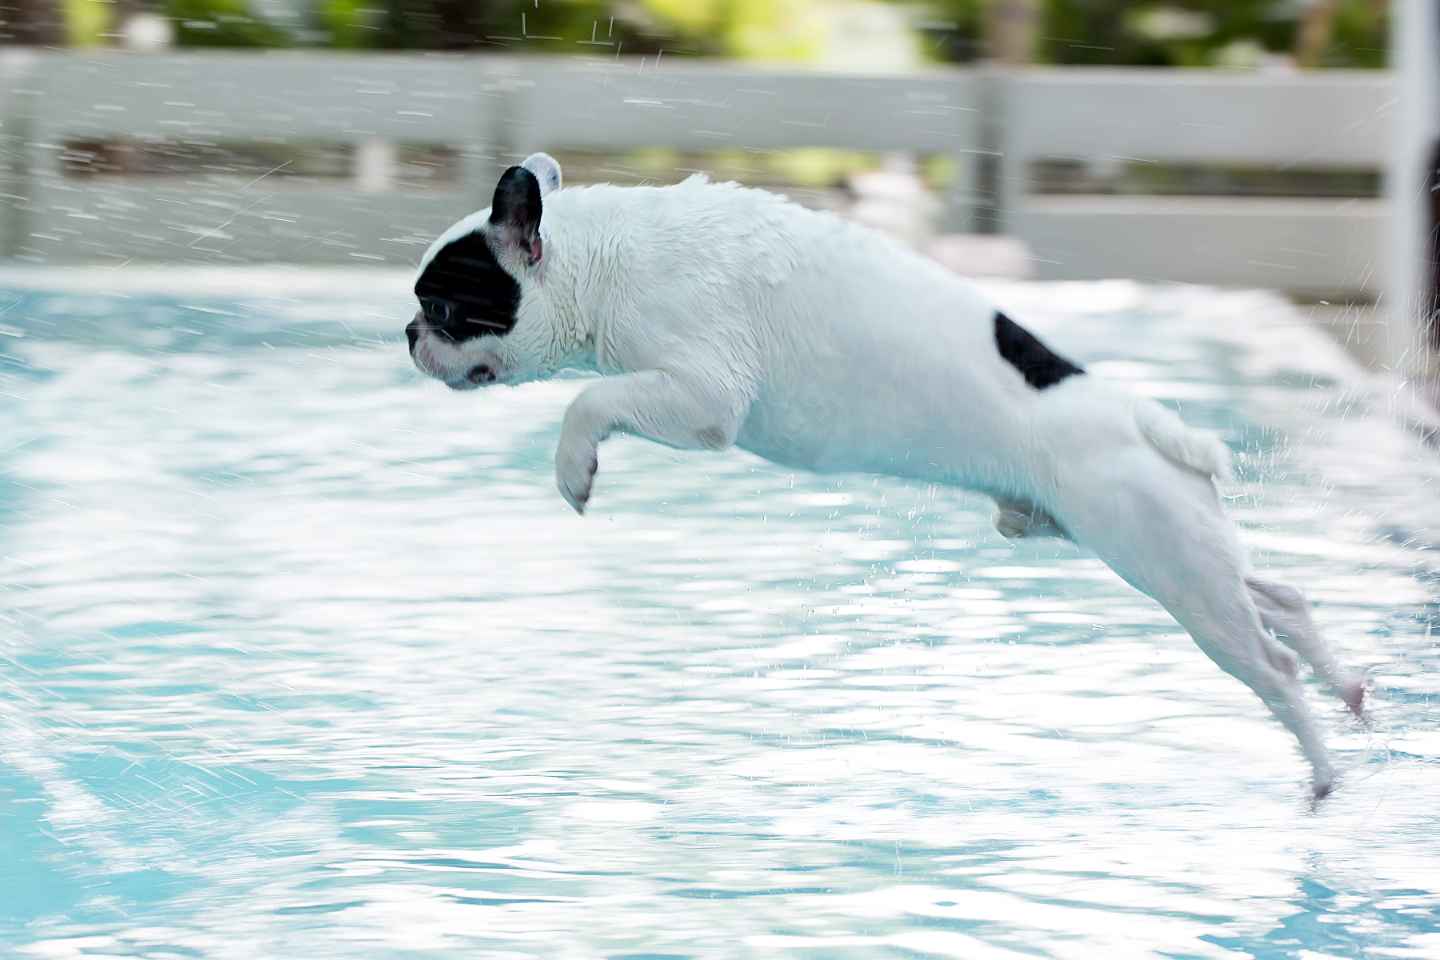 French Bulldog jumping into the pool.